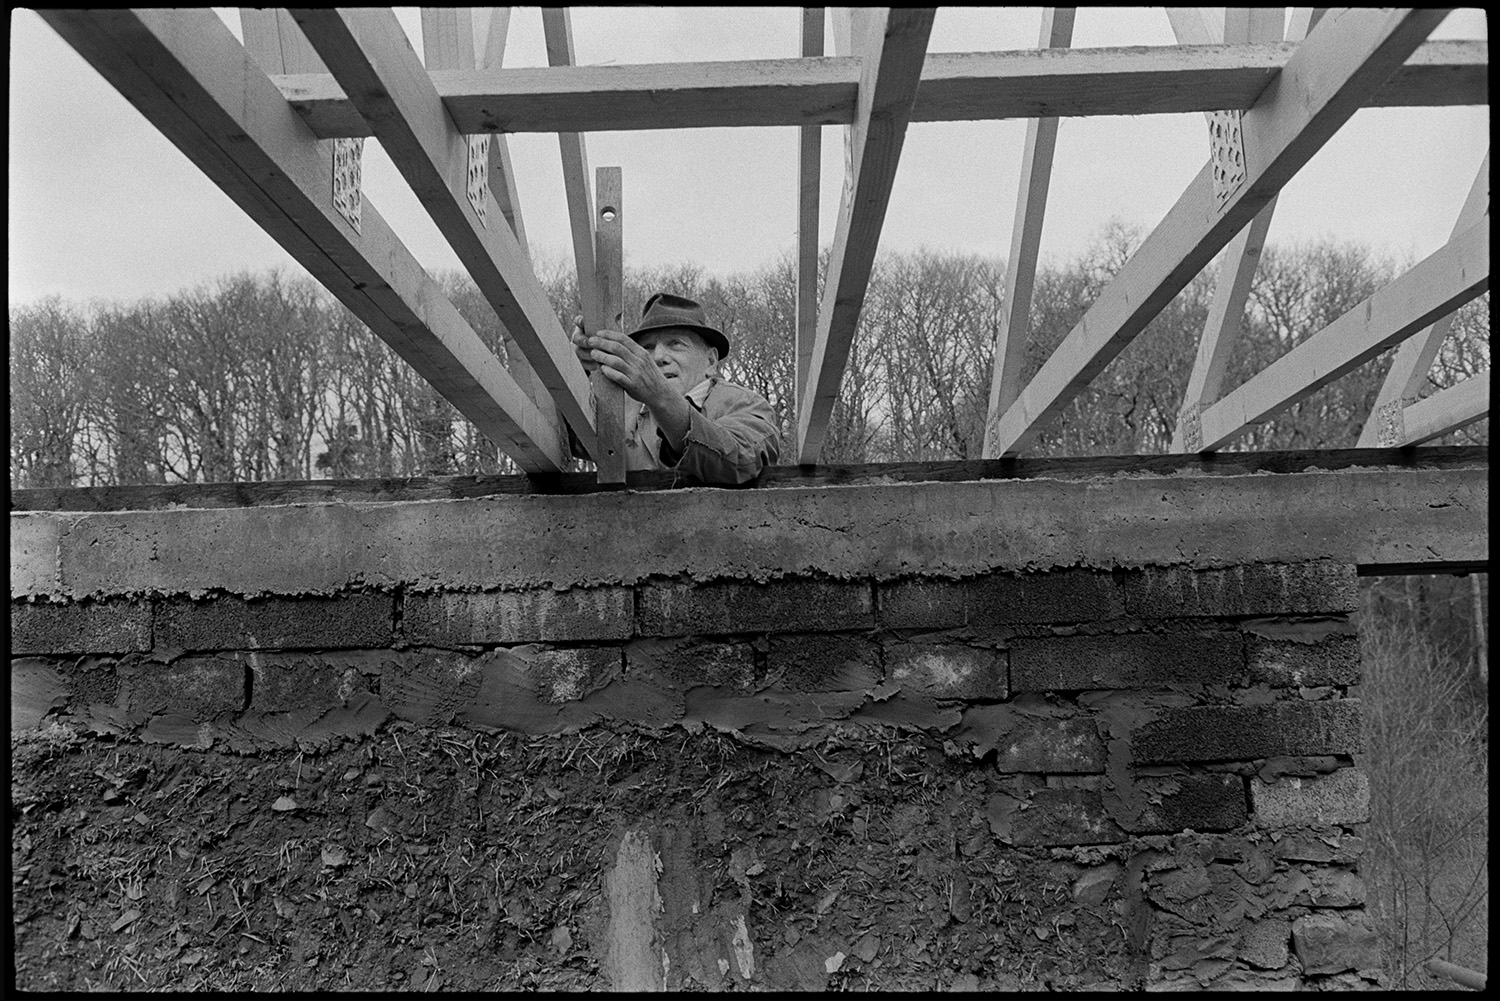 Builder renovating cottage with new roof.
[Builder renovating a cottage with a new roof at Millhams, Dolton. The man is  checking a spirit level against the roof timbers, above a wall of cob and concrete blocks. A line of trees are in the background.]